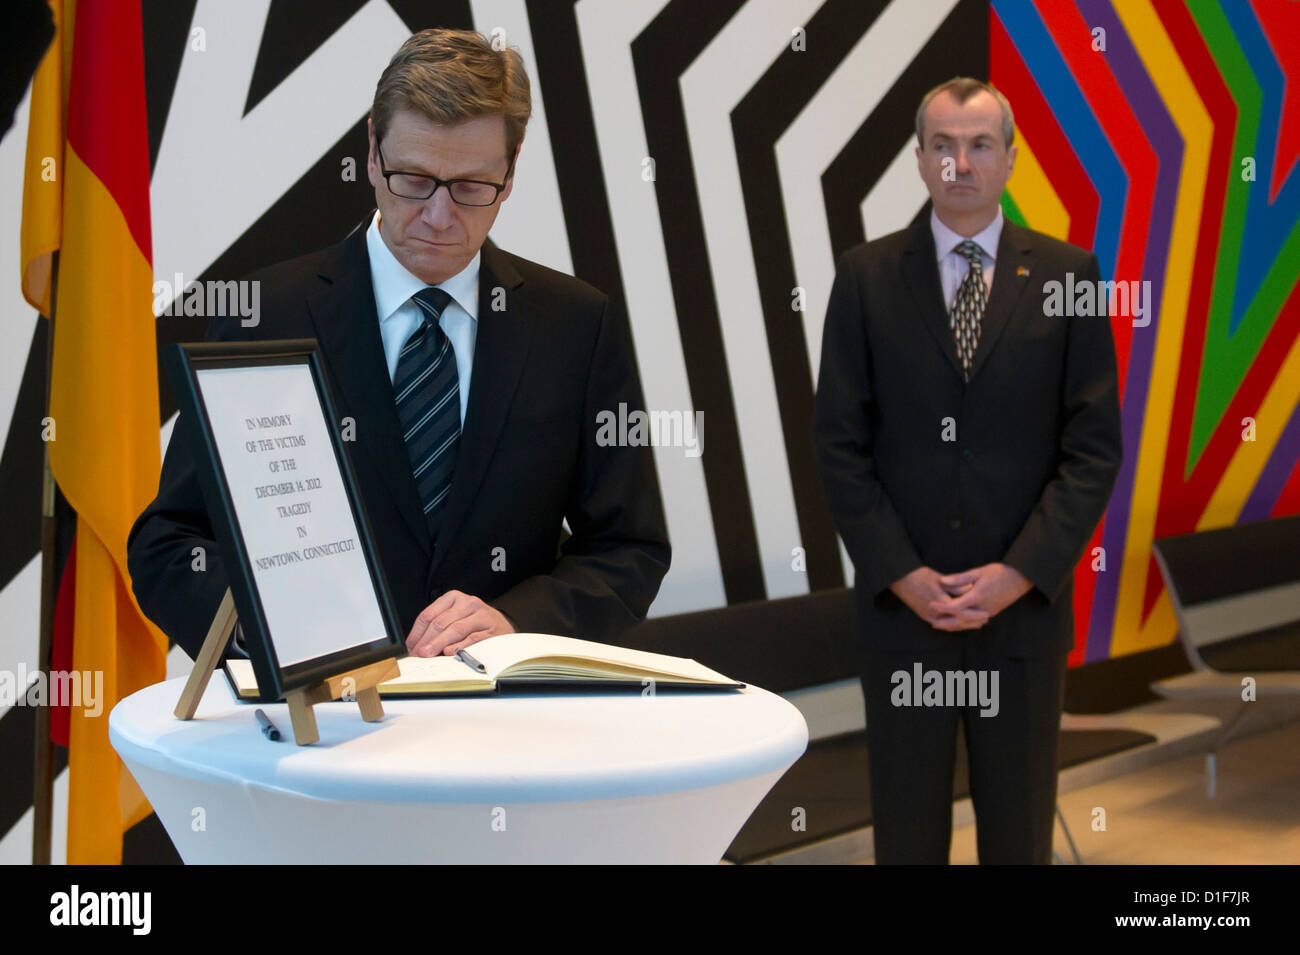 German Foreign Minister Guido Westerwelle signs the book of condolence for the victims of the rampage in the USA at the American Embassy while American Ambassador Philip Murphy stands behind him in Berlin, Germany, 18 December 2012. 26 people and the shooter died during a rampage at an elementary school in Newtown, Connecticut in the USA. Photo: MARC TIRL Stock Photo